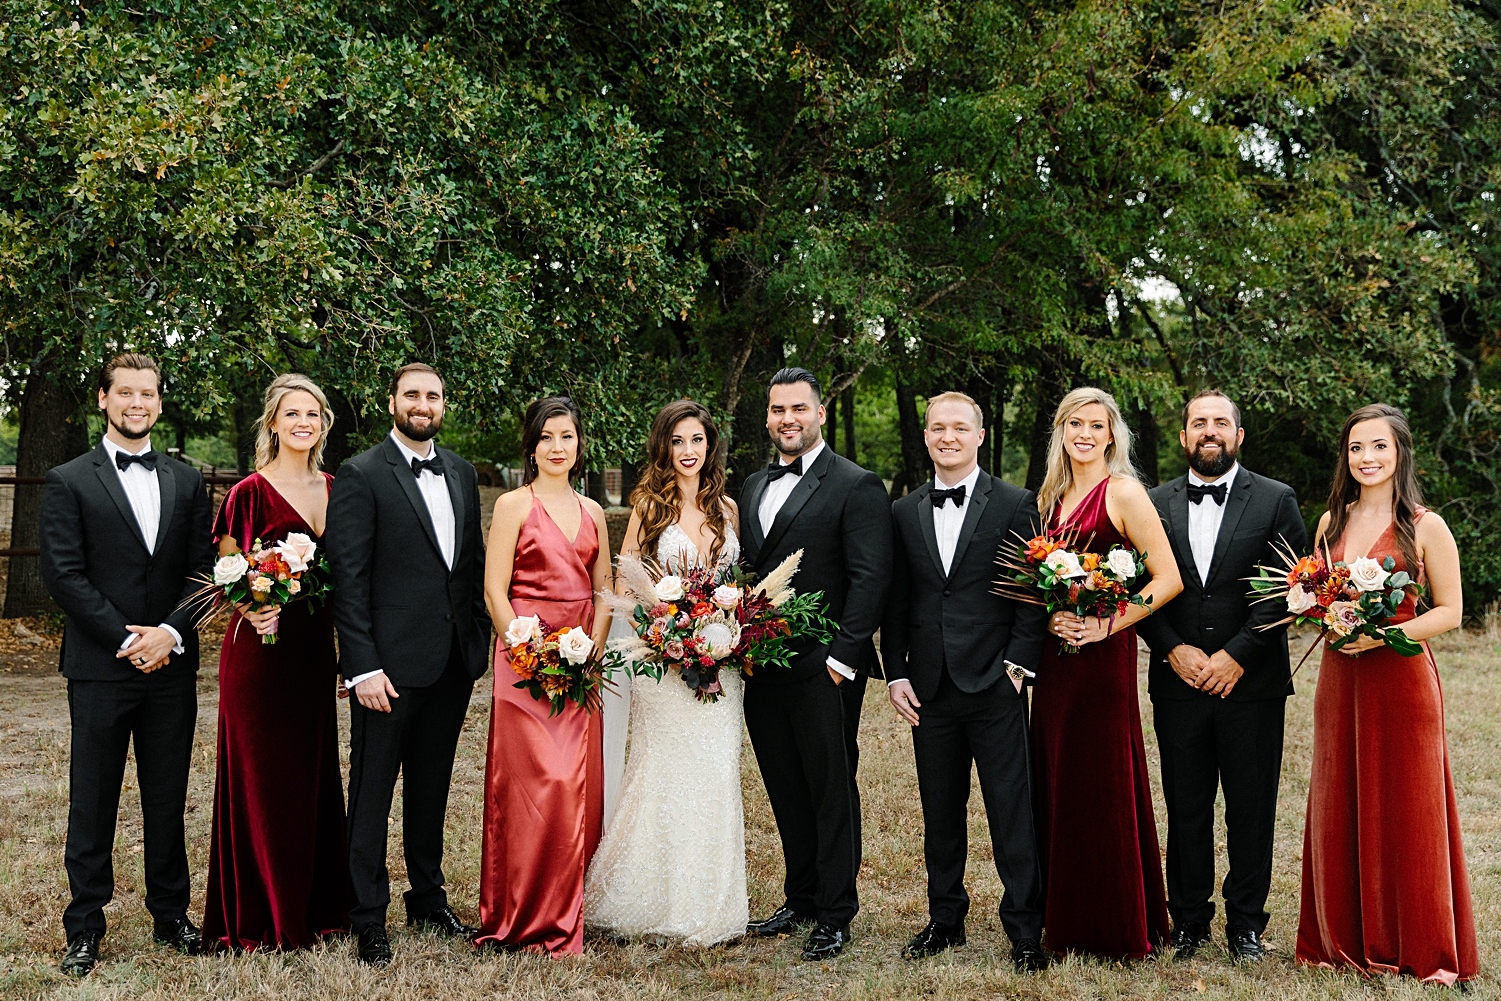 bride groomsmen and bridesmaids in red dresses holding floral bouquets standing in front of green trees Emerson Venue Wedding